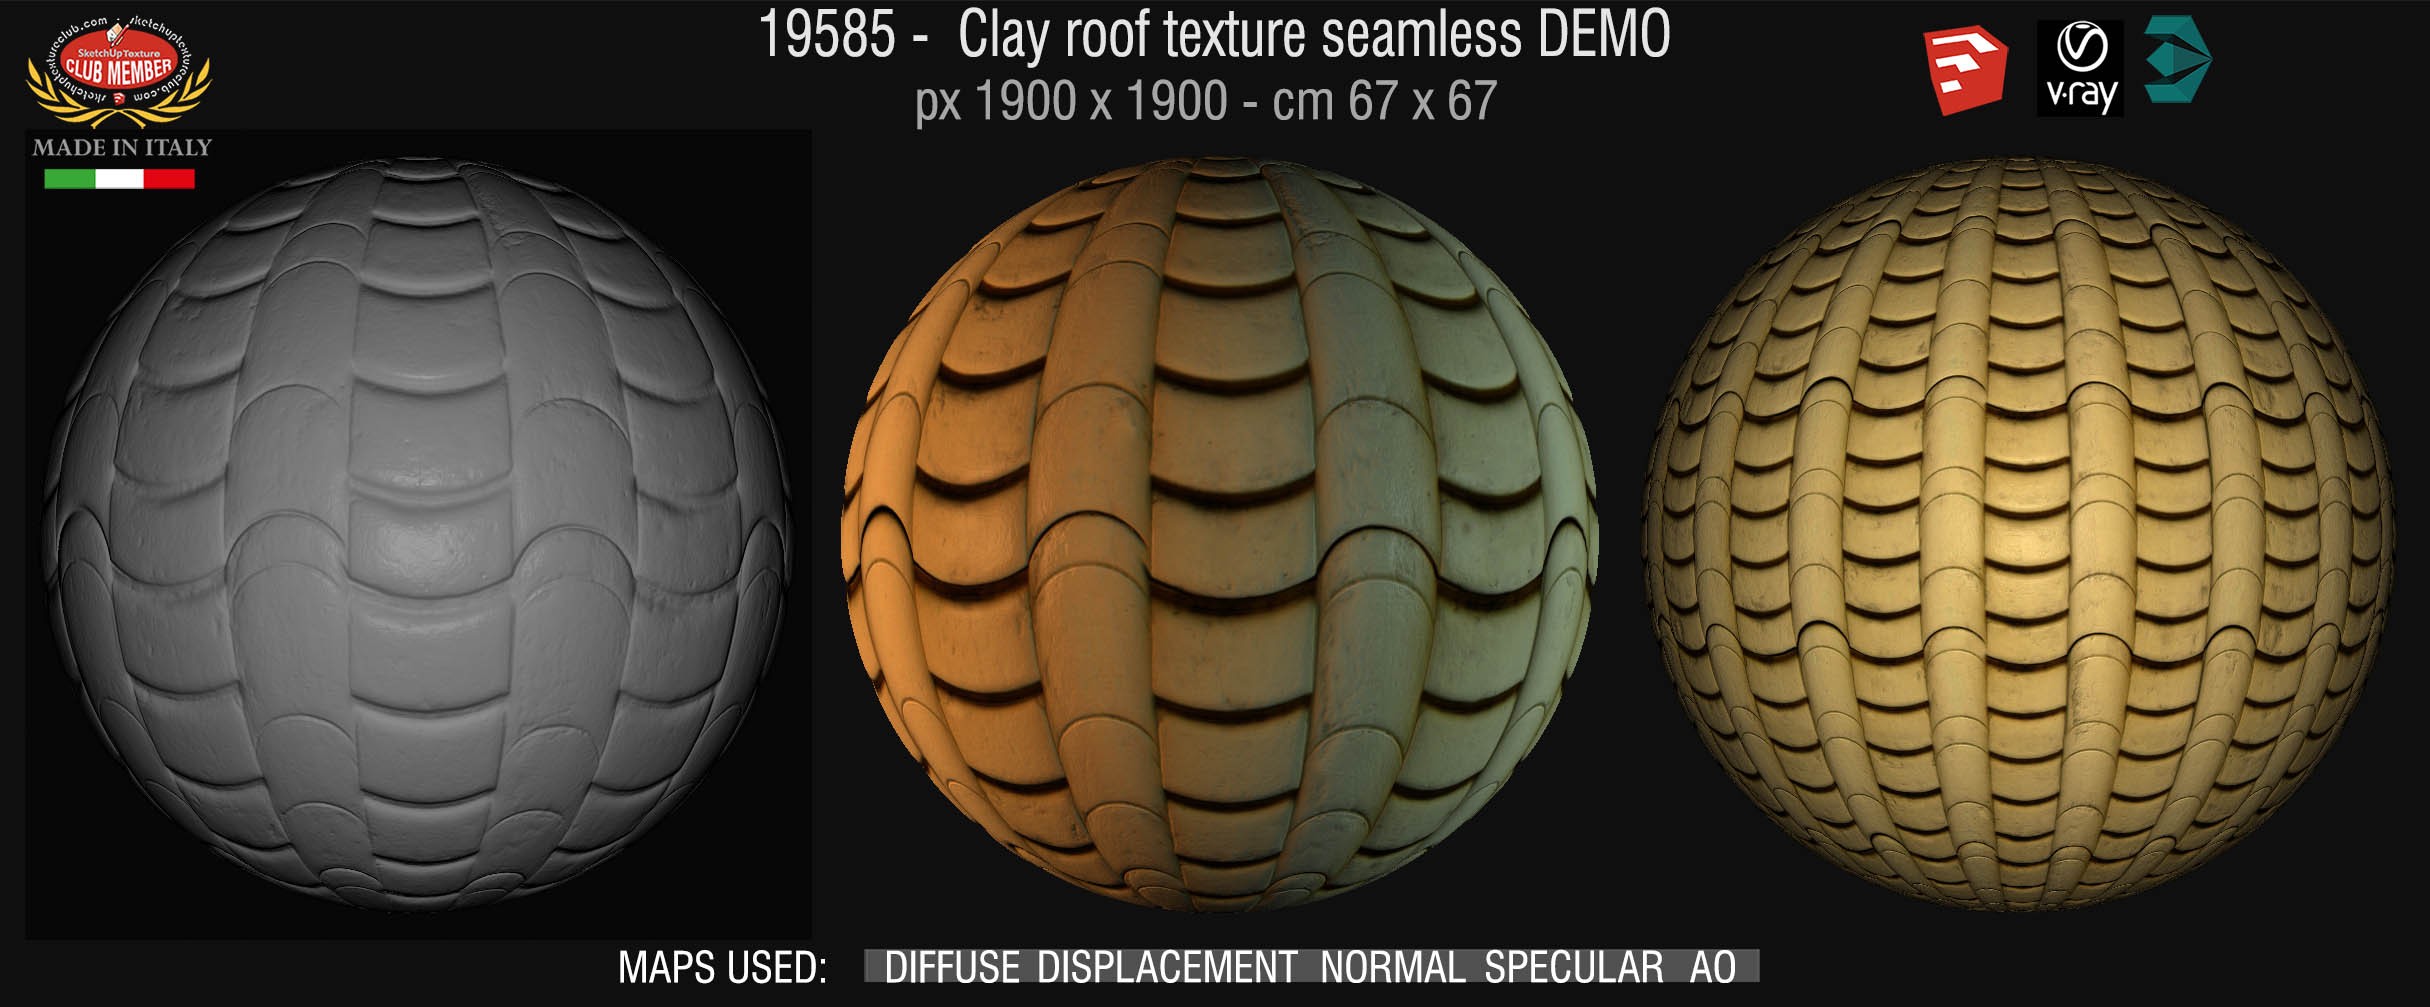 19585 Clay roof texture seamless + maps DEMO